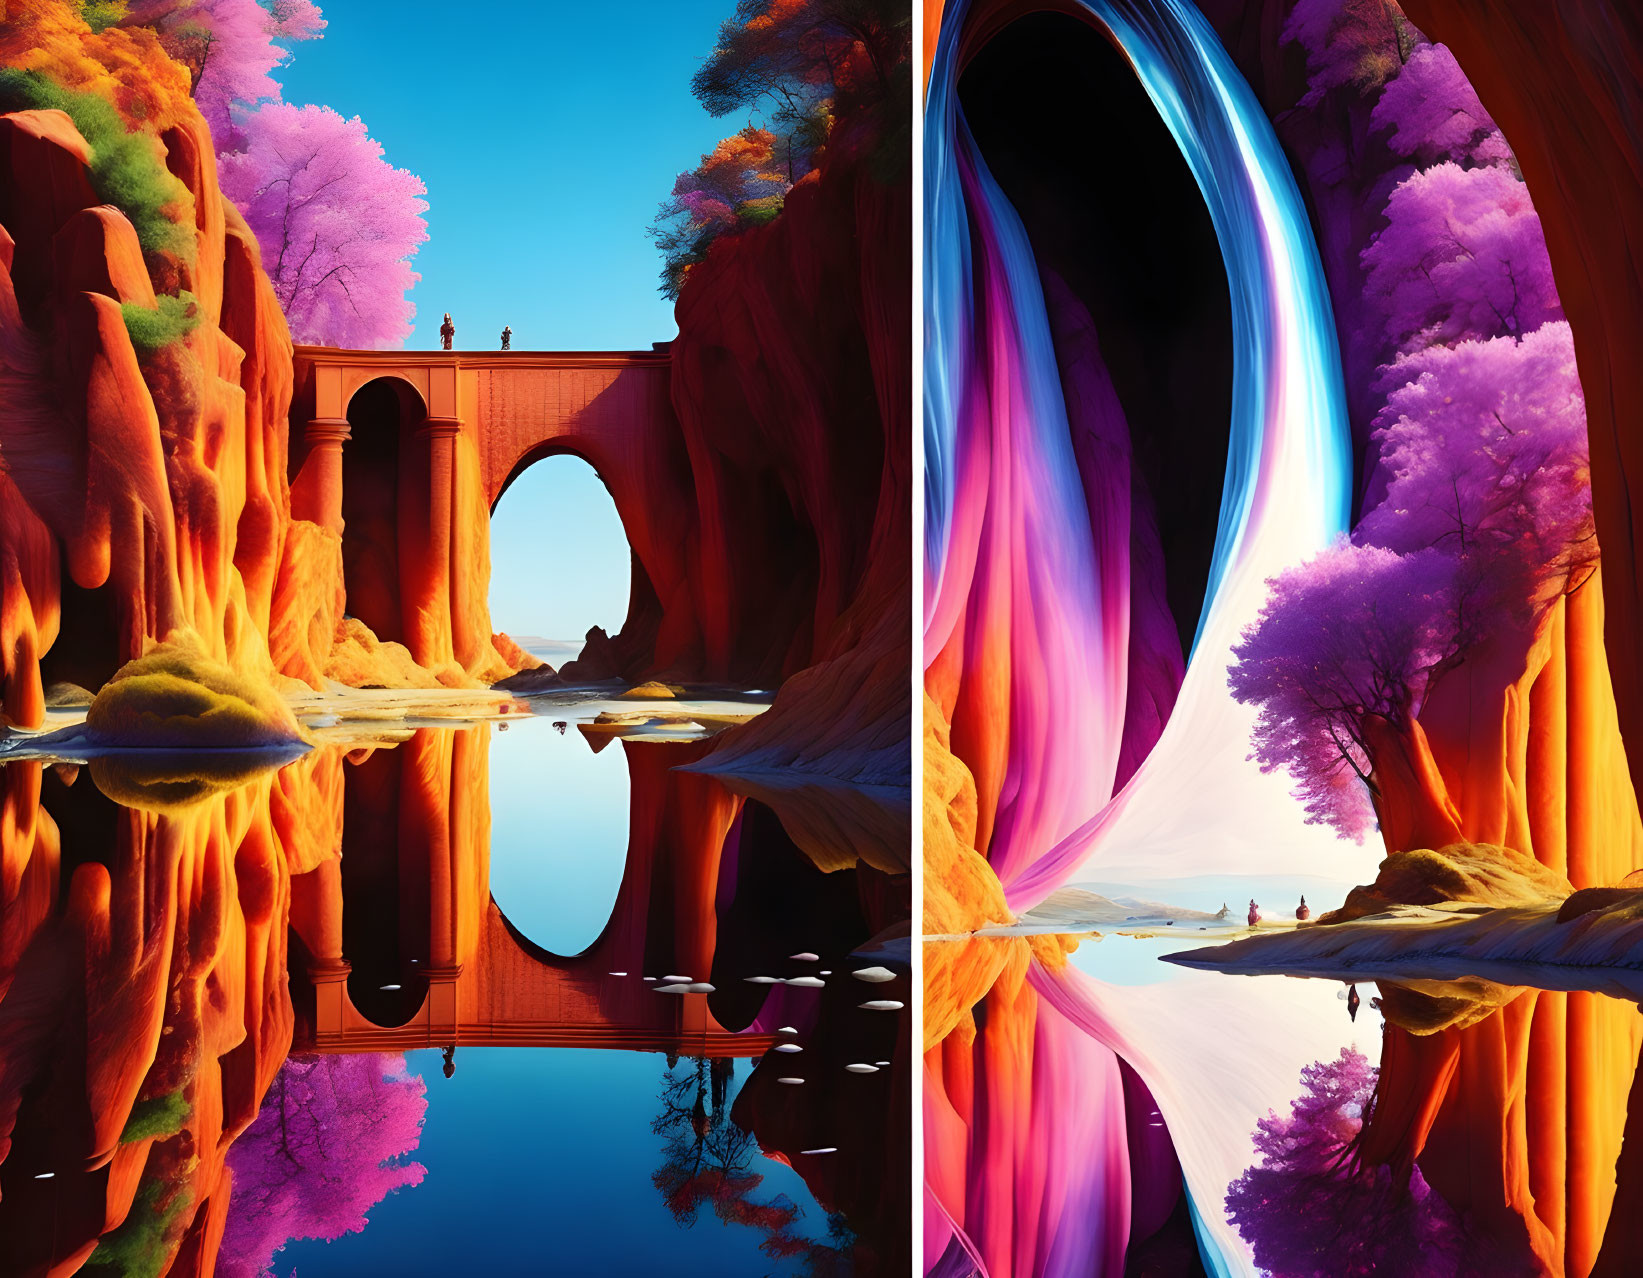 Colorful Surreal Landscape with Trees, Bridge, and Waterfall